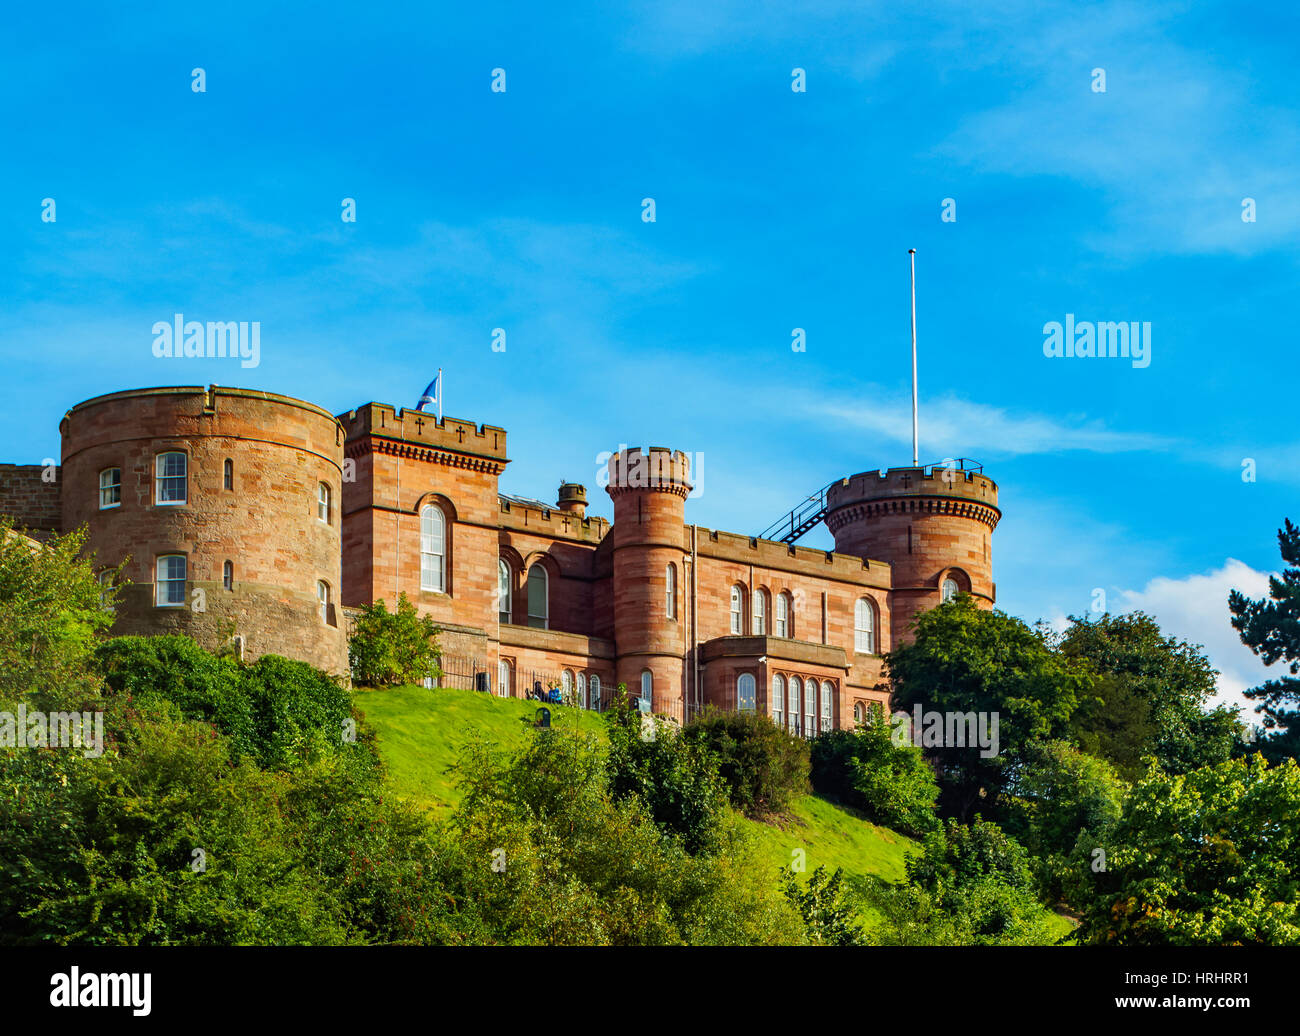 View of Inverness Castle, Inverness, Highlands, Scotland, United Kingdom Stock Photo